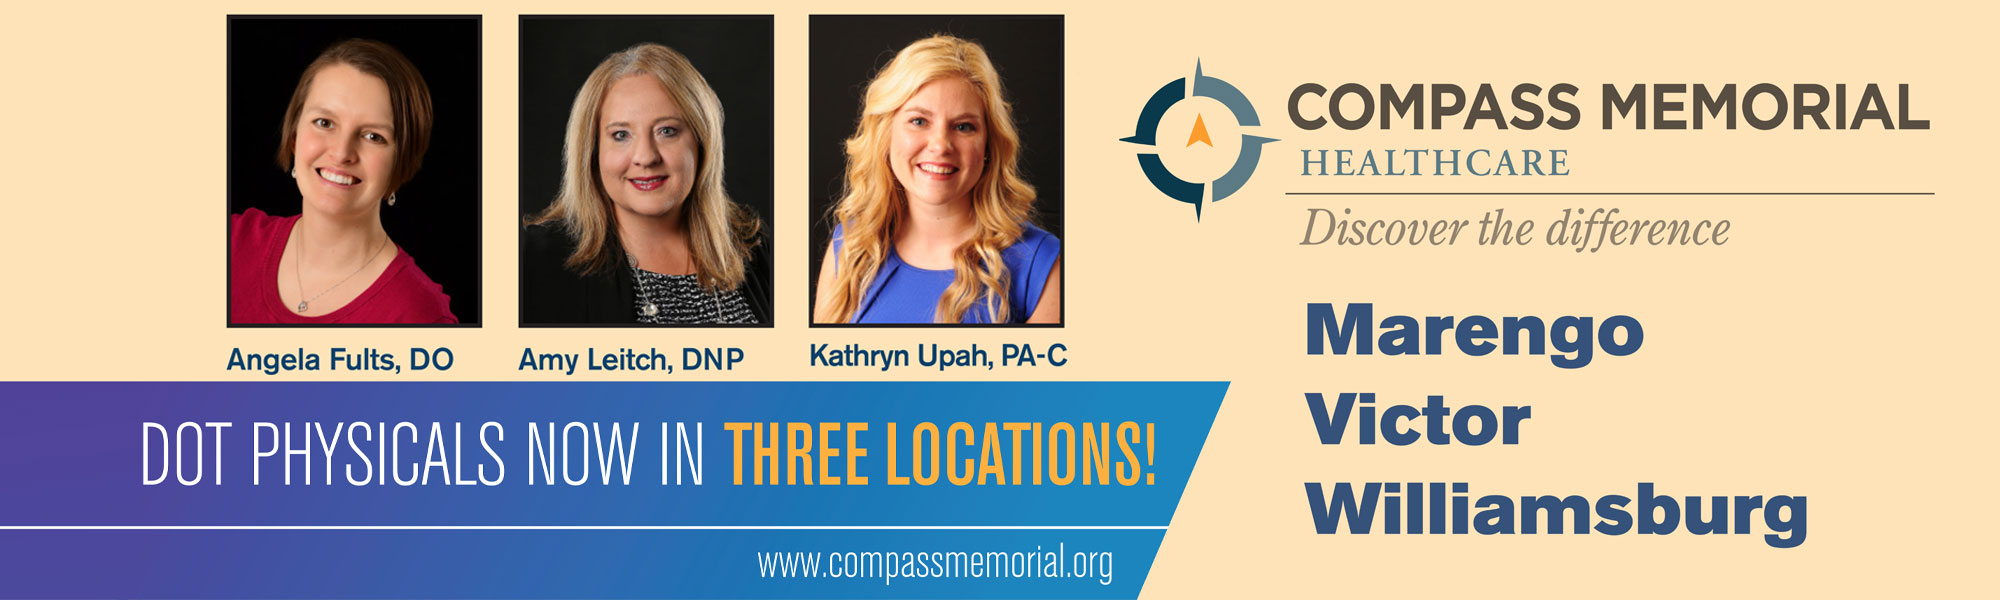 COMPASS MEMORIAL HEALTHCARE
Discover The Difference

Physicians Angela Fults, DO; Amy Leitch, DNP; Kathryn Upah, PA-C

DOT Physicals now in three locations!

Marengo, Victor, Williamsburg